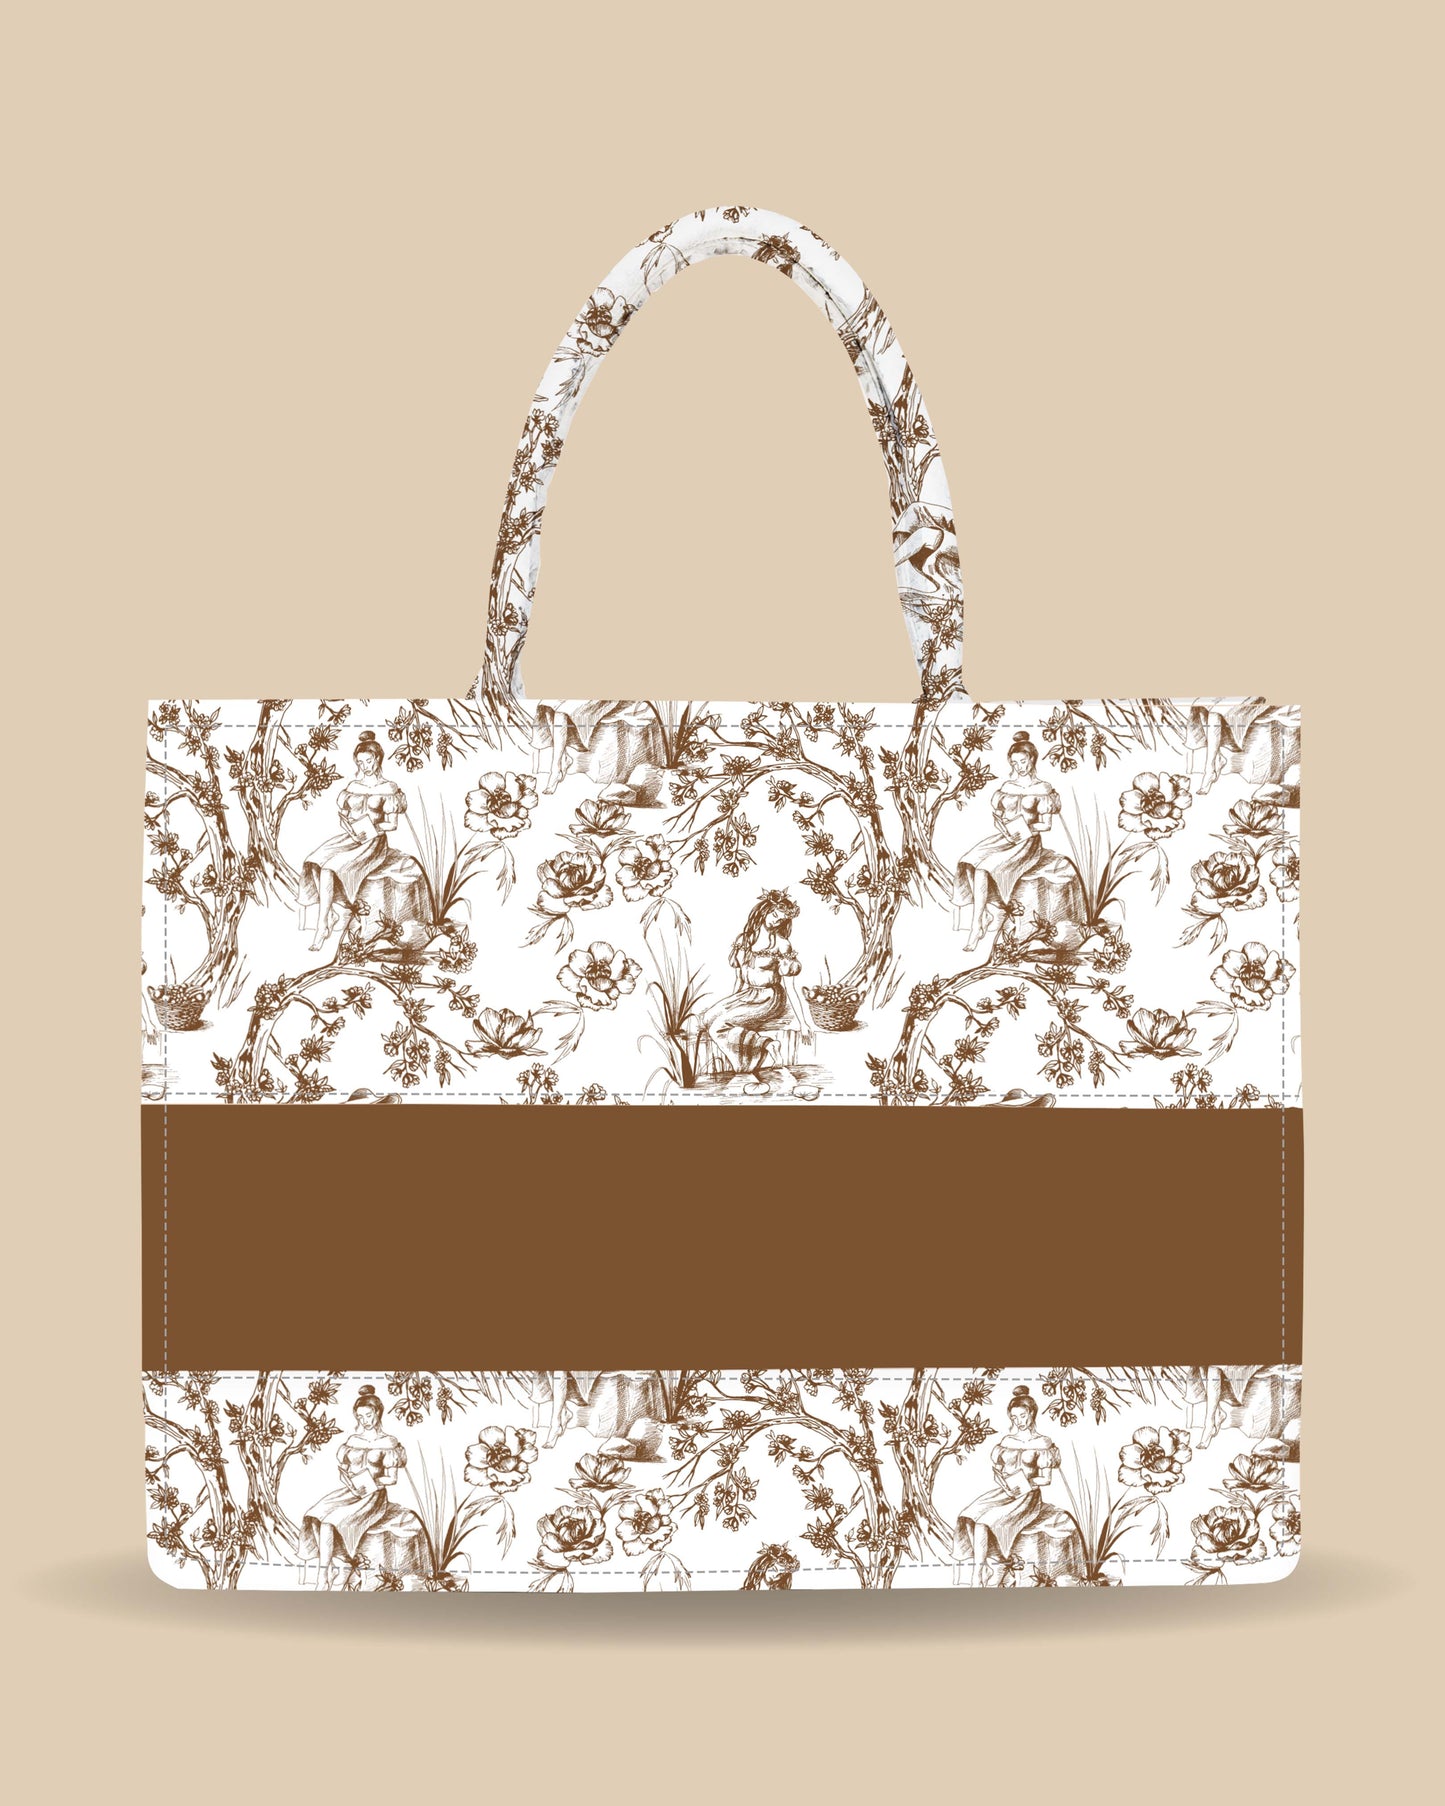 Customized Tote Bag  Designed with Beautiful Girls And Trees